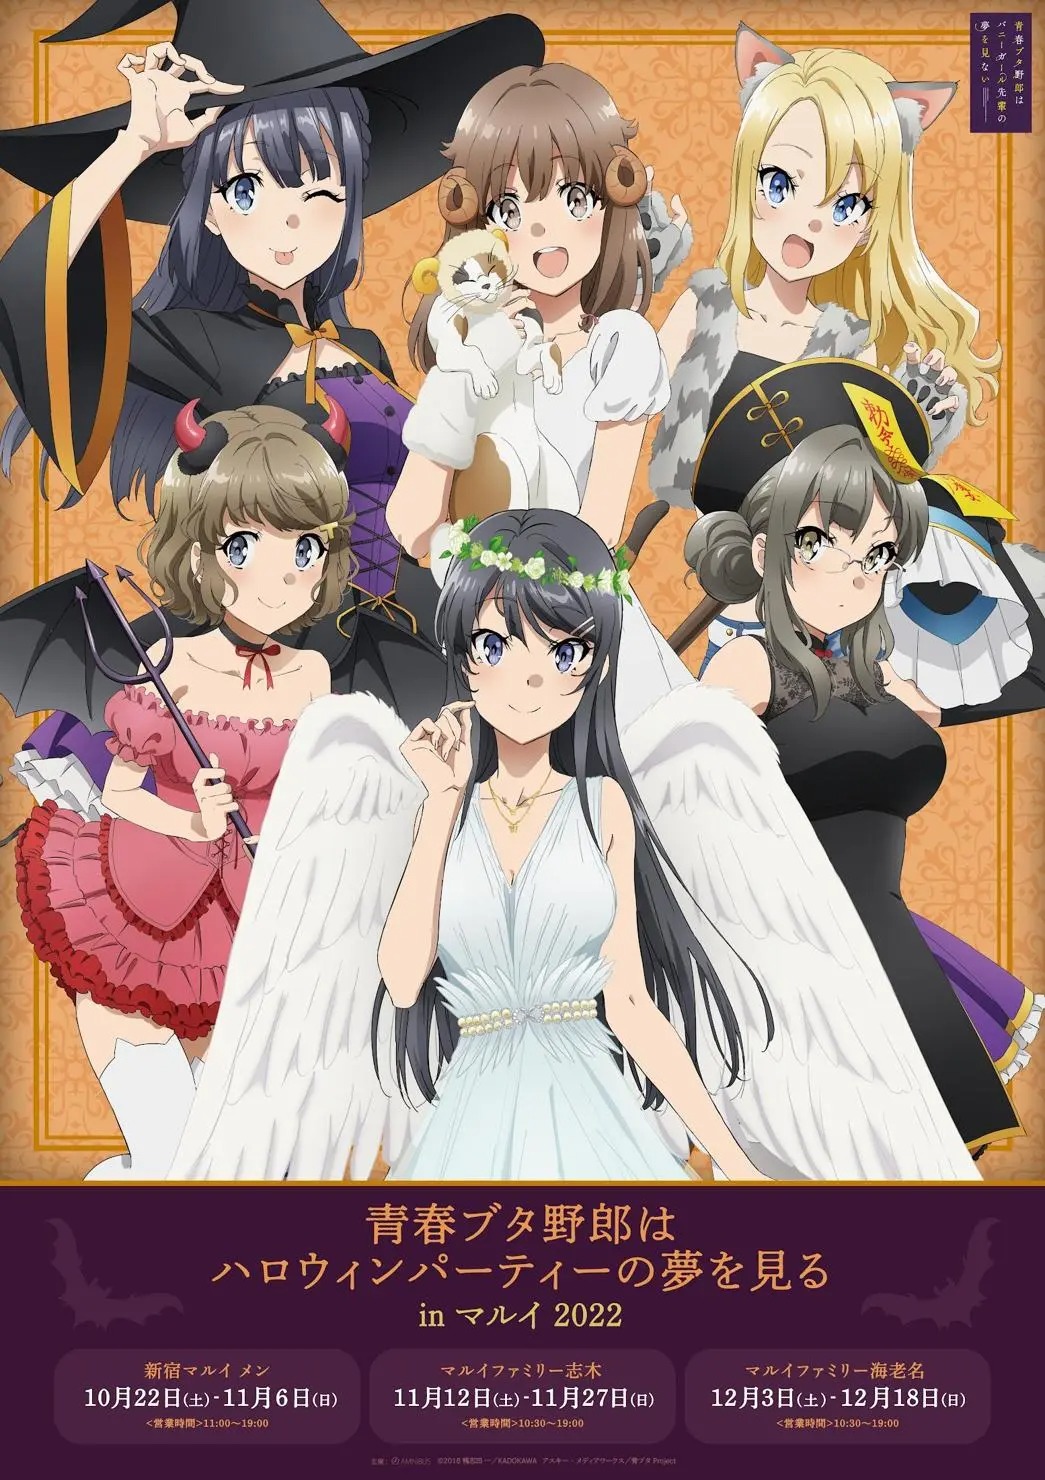 Crunchyroll - Bunny Girl Senpai Anime Gets in the Haunting Spirit With  Halloween Event